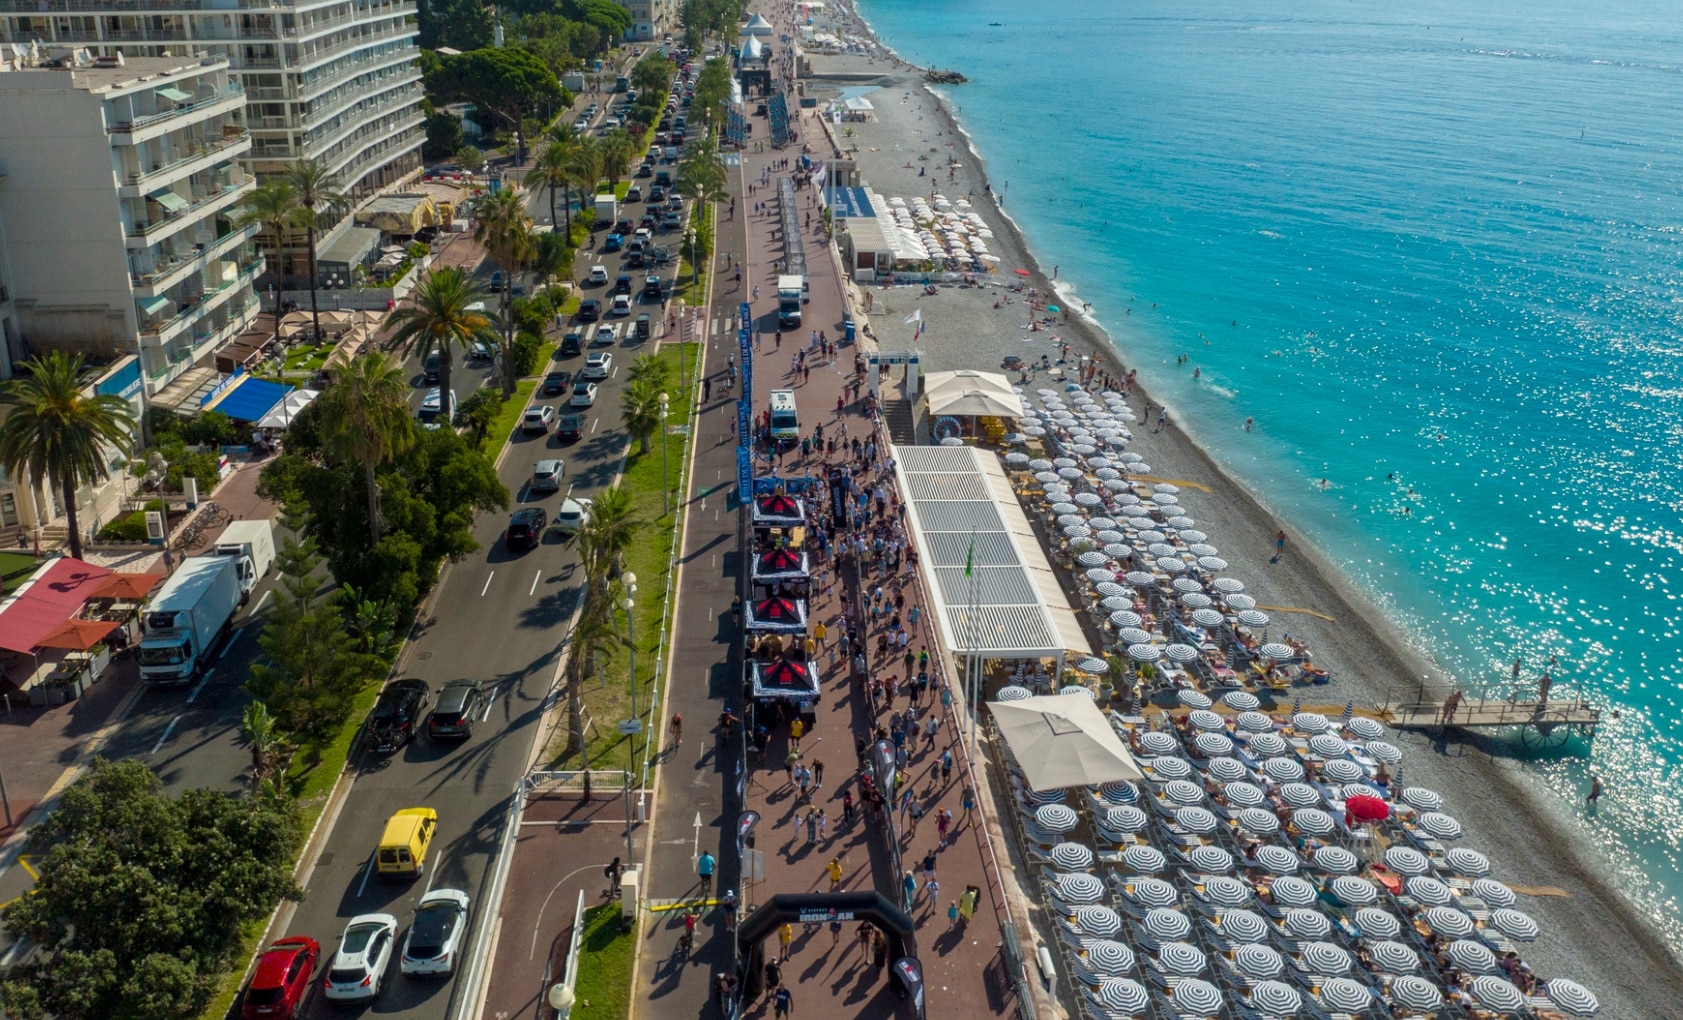 IRONMAN/ Image of the finish area in Nice